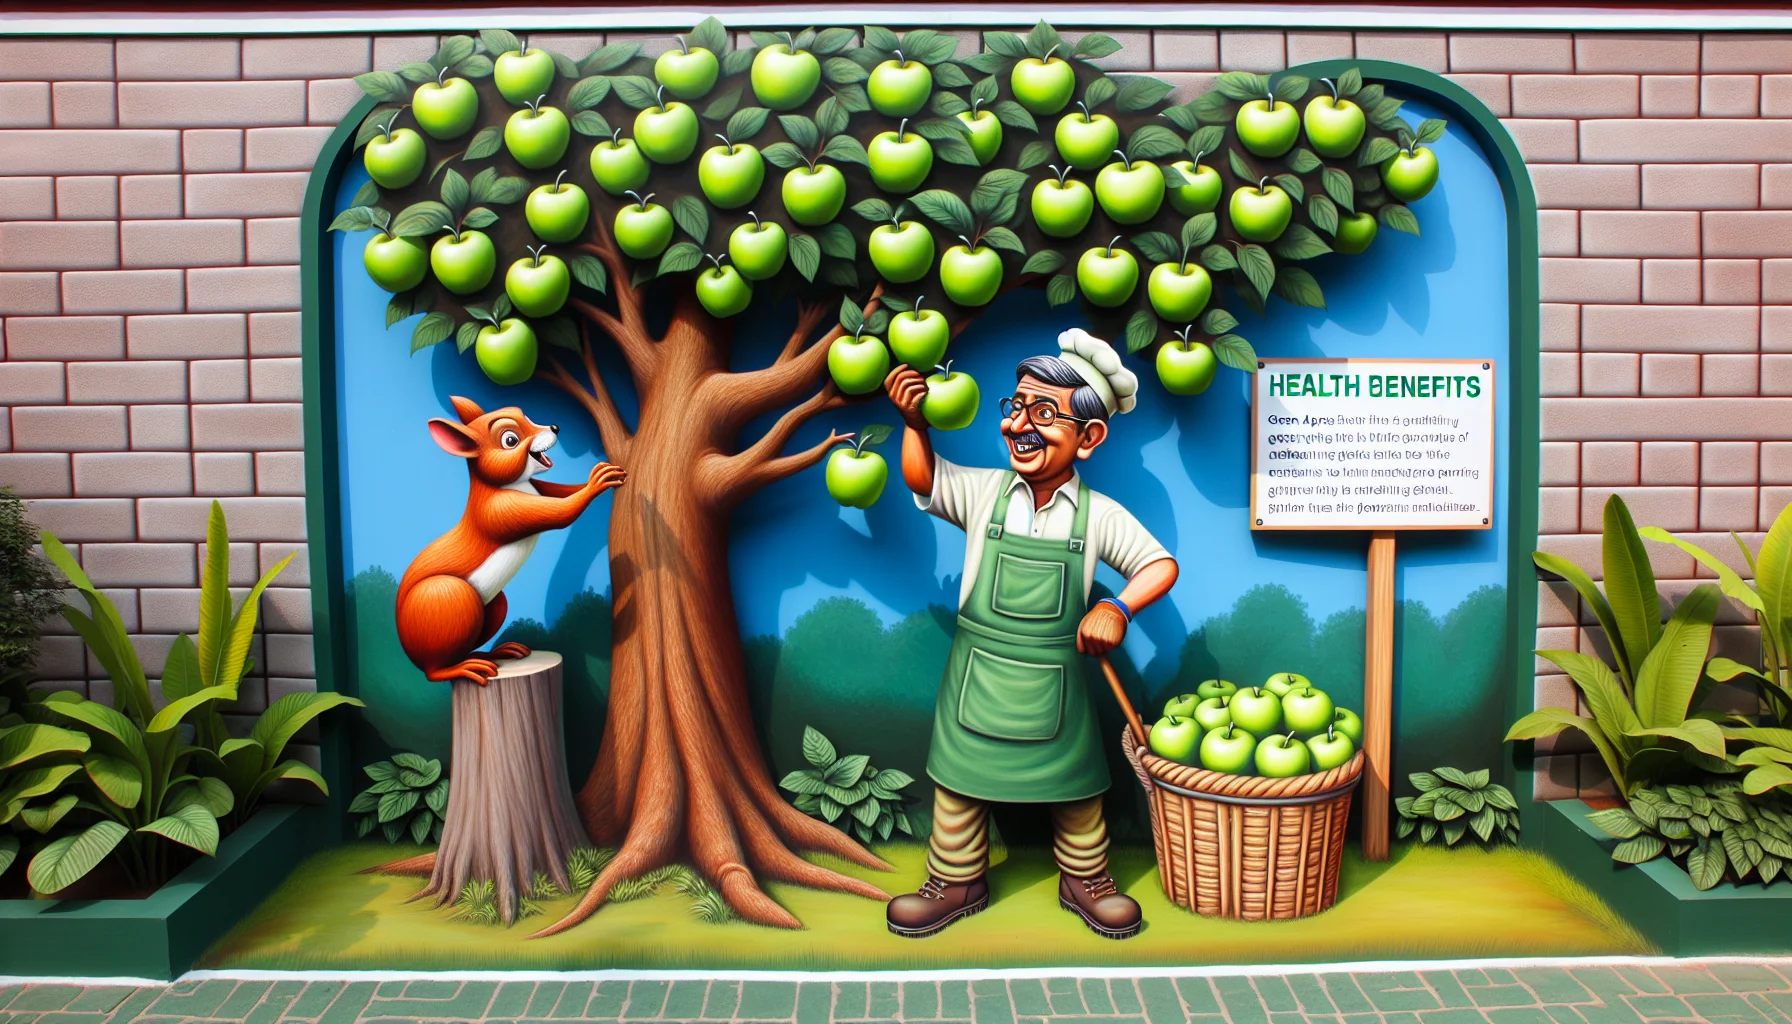 Craft an image showing a humorous scenario involving the advantages of green apples to inspire gardening interest. Picture an apple tree laden with bright green apples, a South Asian man in gardening attire amusingly struggling to keep an overly eager, slightly bigger squirrel from hoarding all the apples. Nearby, a covered signboard points to the health benefits of green apples, inciting a vibrant atmosphere of mirth and wellness. This scene should aim to blend realism, nature, humour, and the joy of gardening together in a playful, inviting manner.